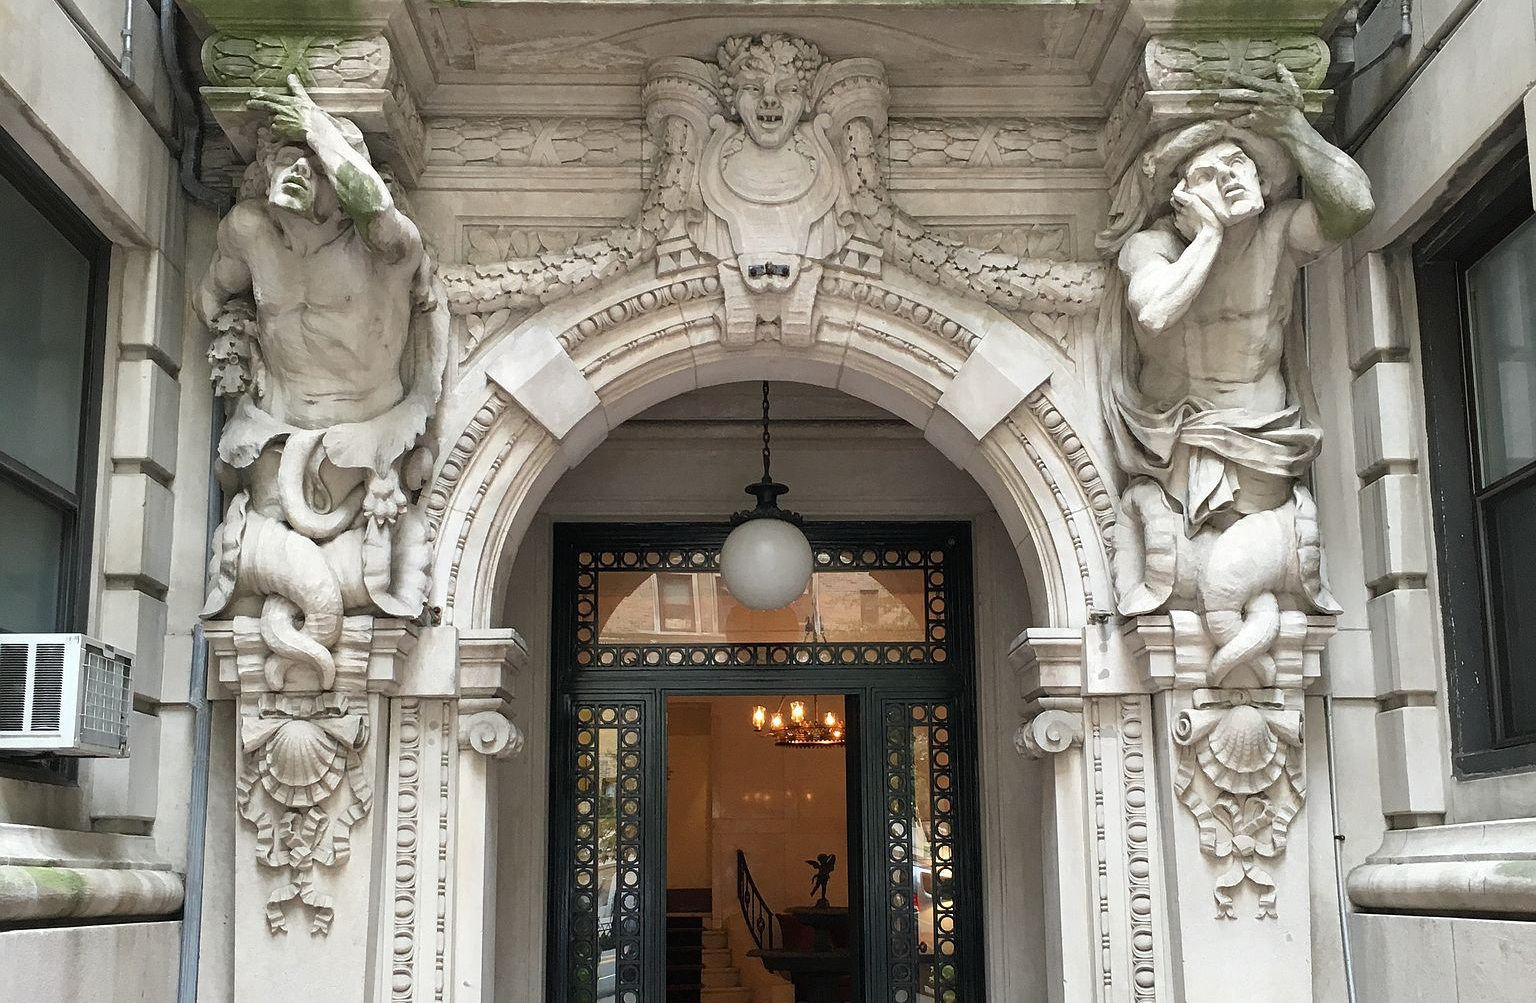 Elaborate exterior entranceway to morningside heights residential building